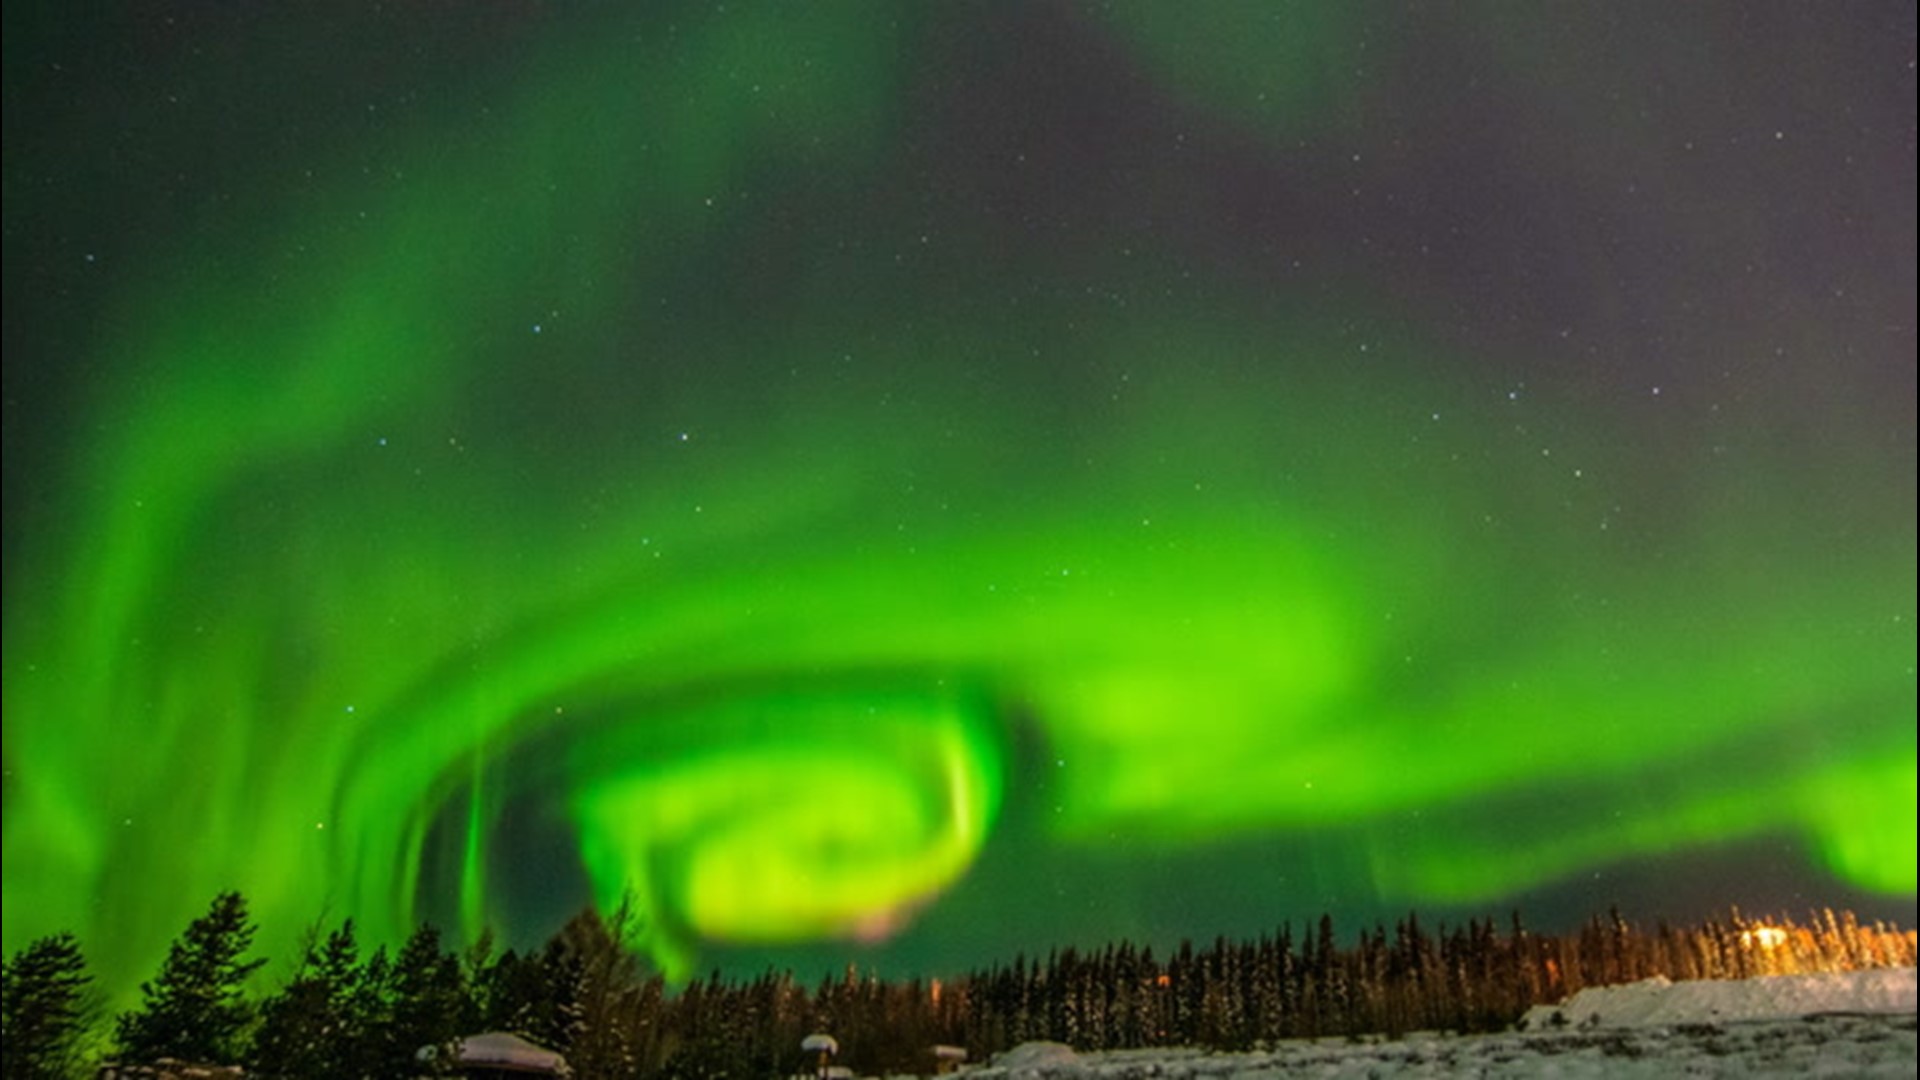 These amazing photos of the aurora were taken in Fairbanks, Alaska, on April 7, during a cold snap with temperatures as low as 20 degrees below zero Fahrenheit.